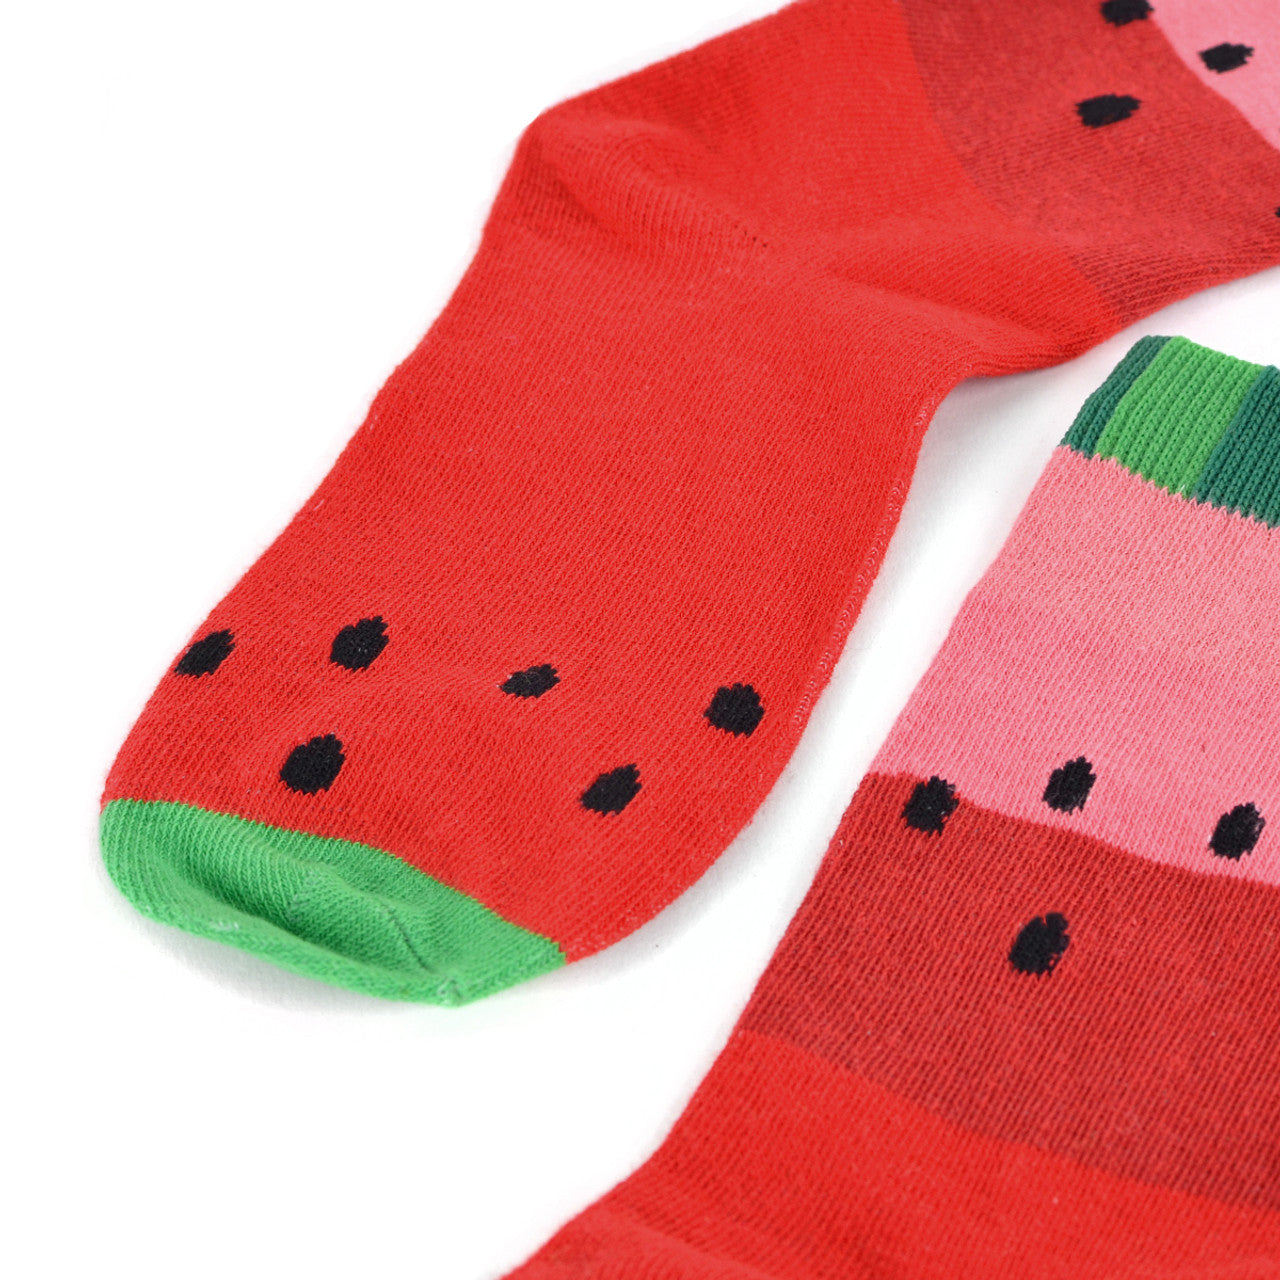 Vibrant red ankle socks with a watermelon-inspired design, featuring a green cuff, black seed details over the red base, and a green toe cap.